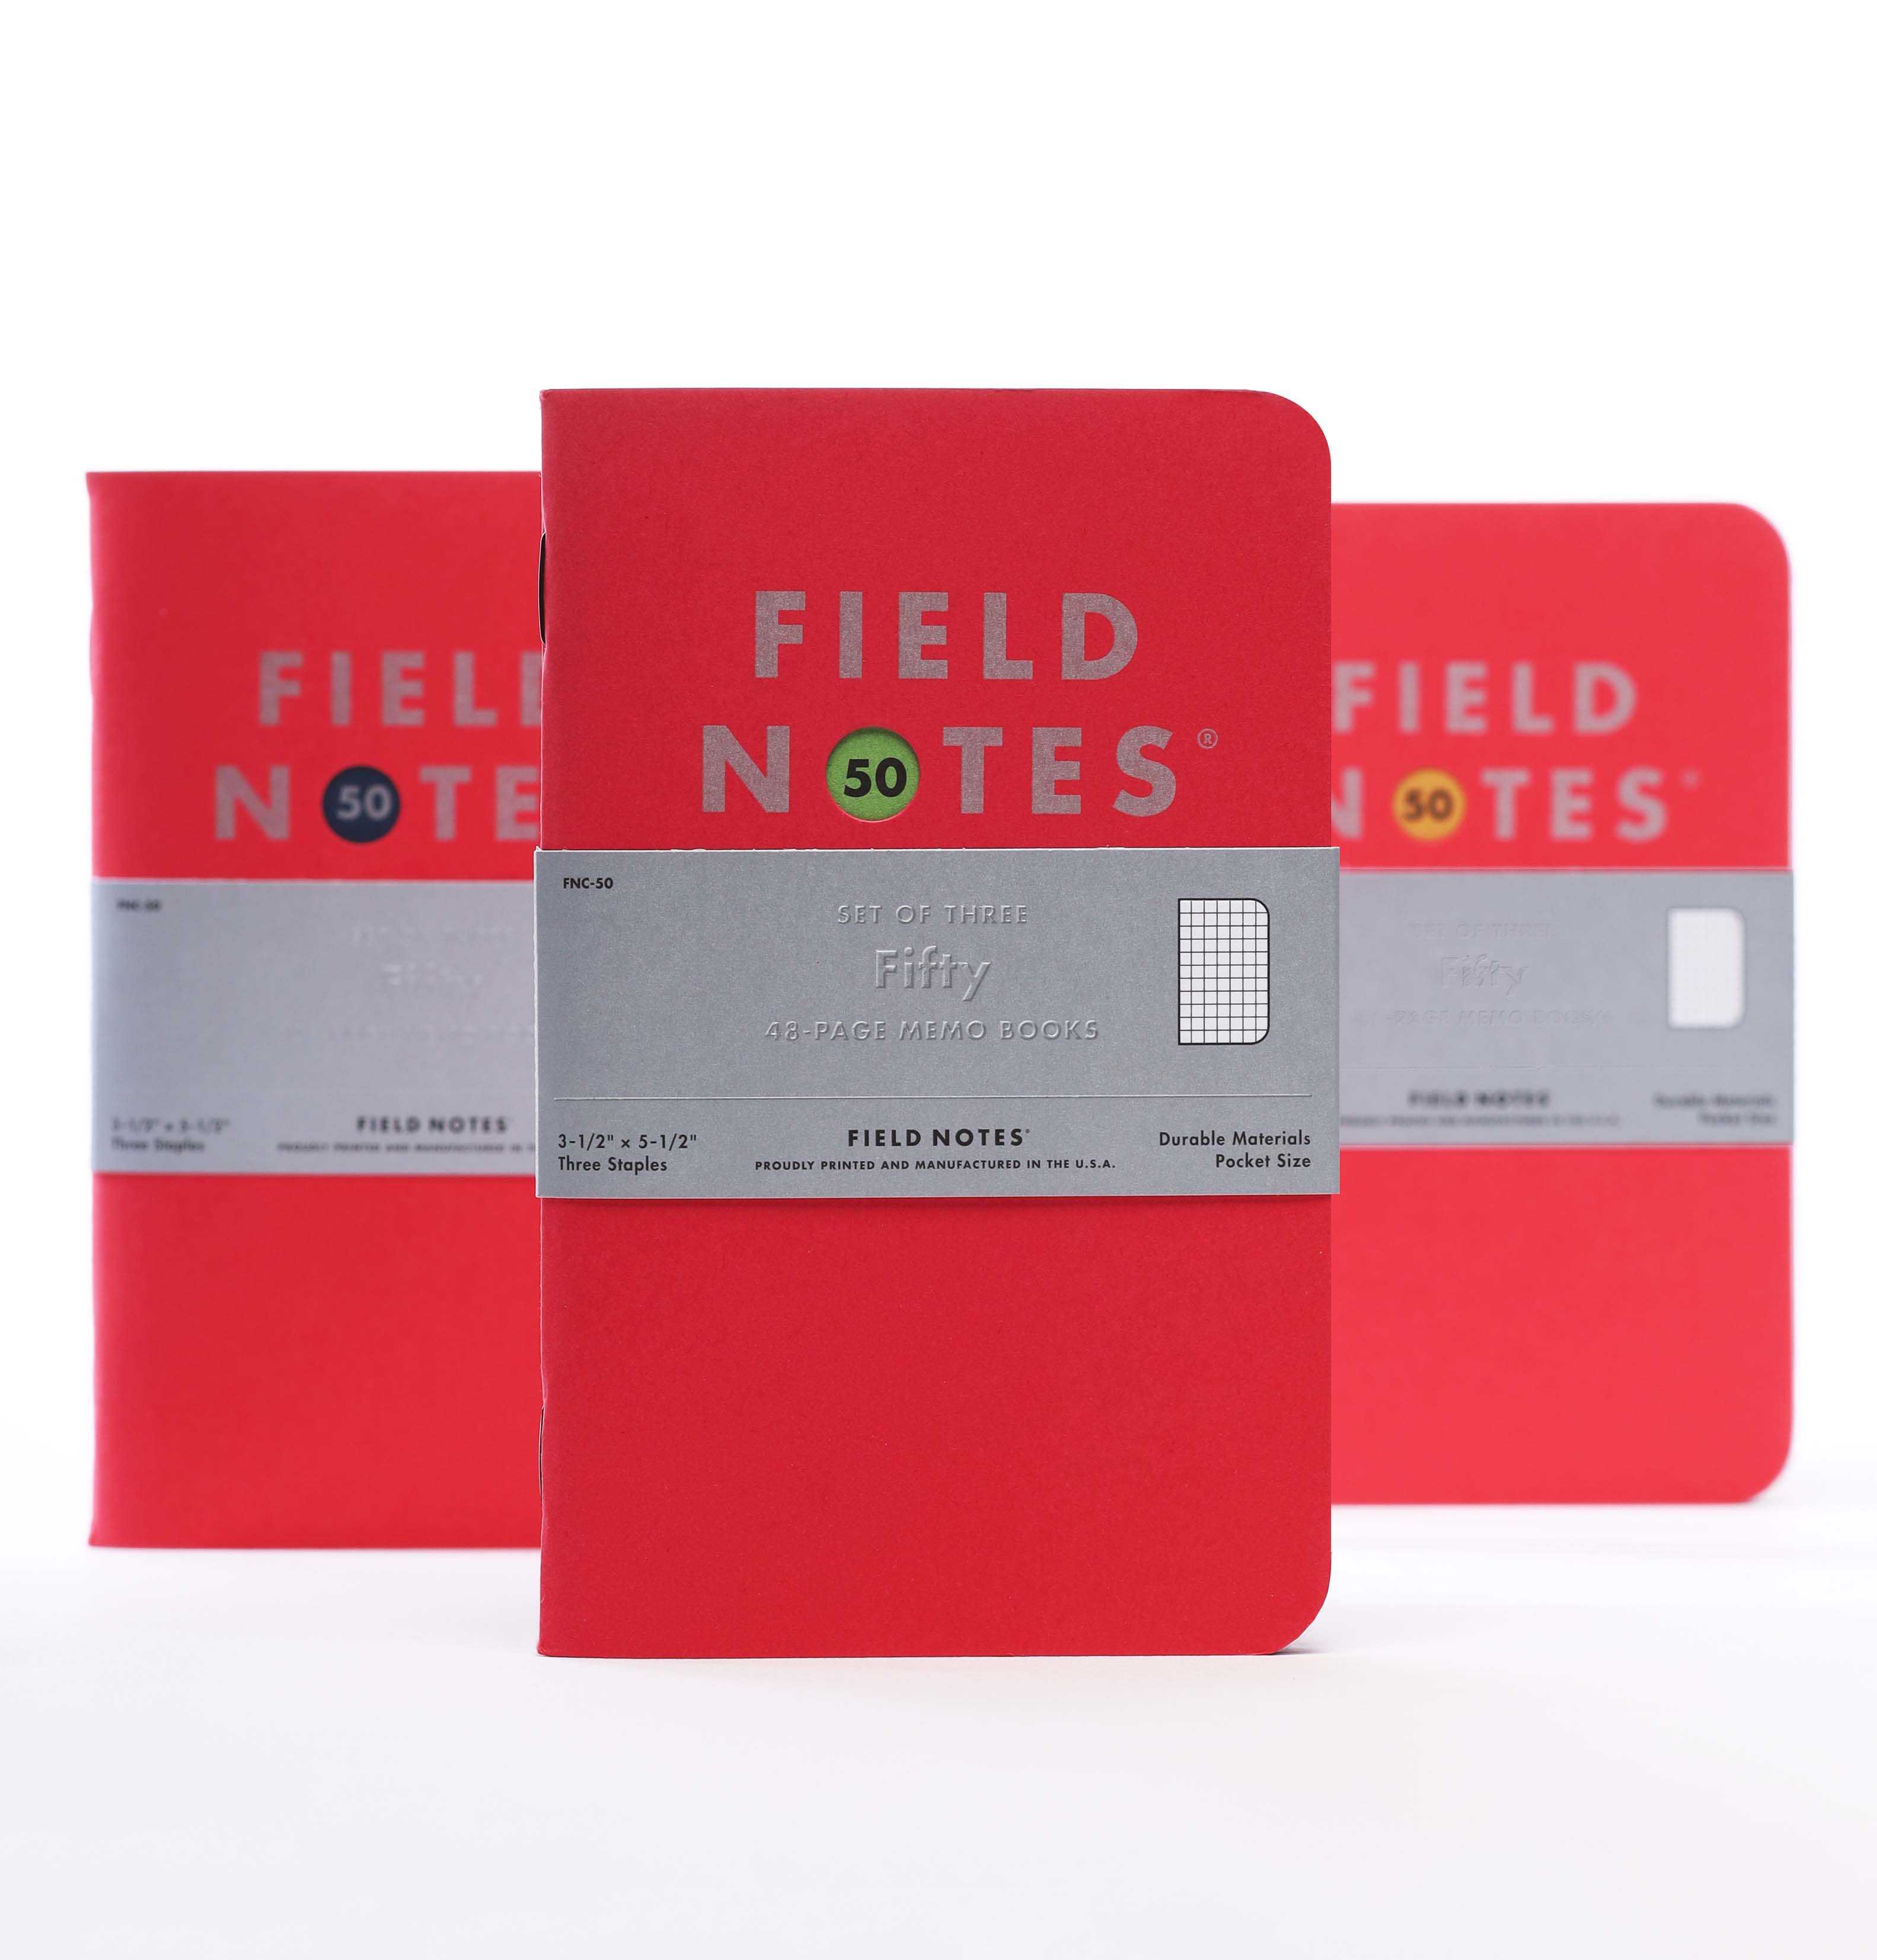 Field Notes Fifty Edition 3-Pack